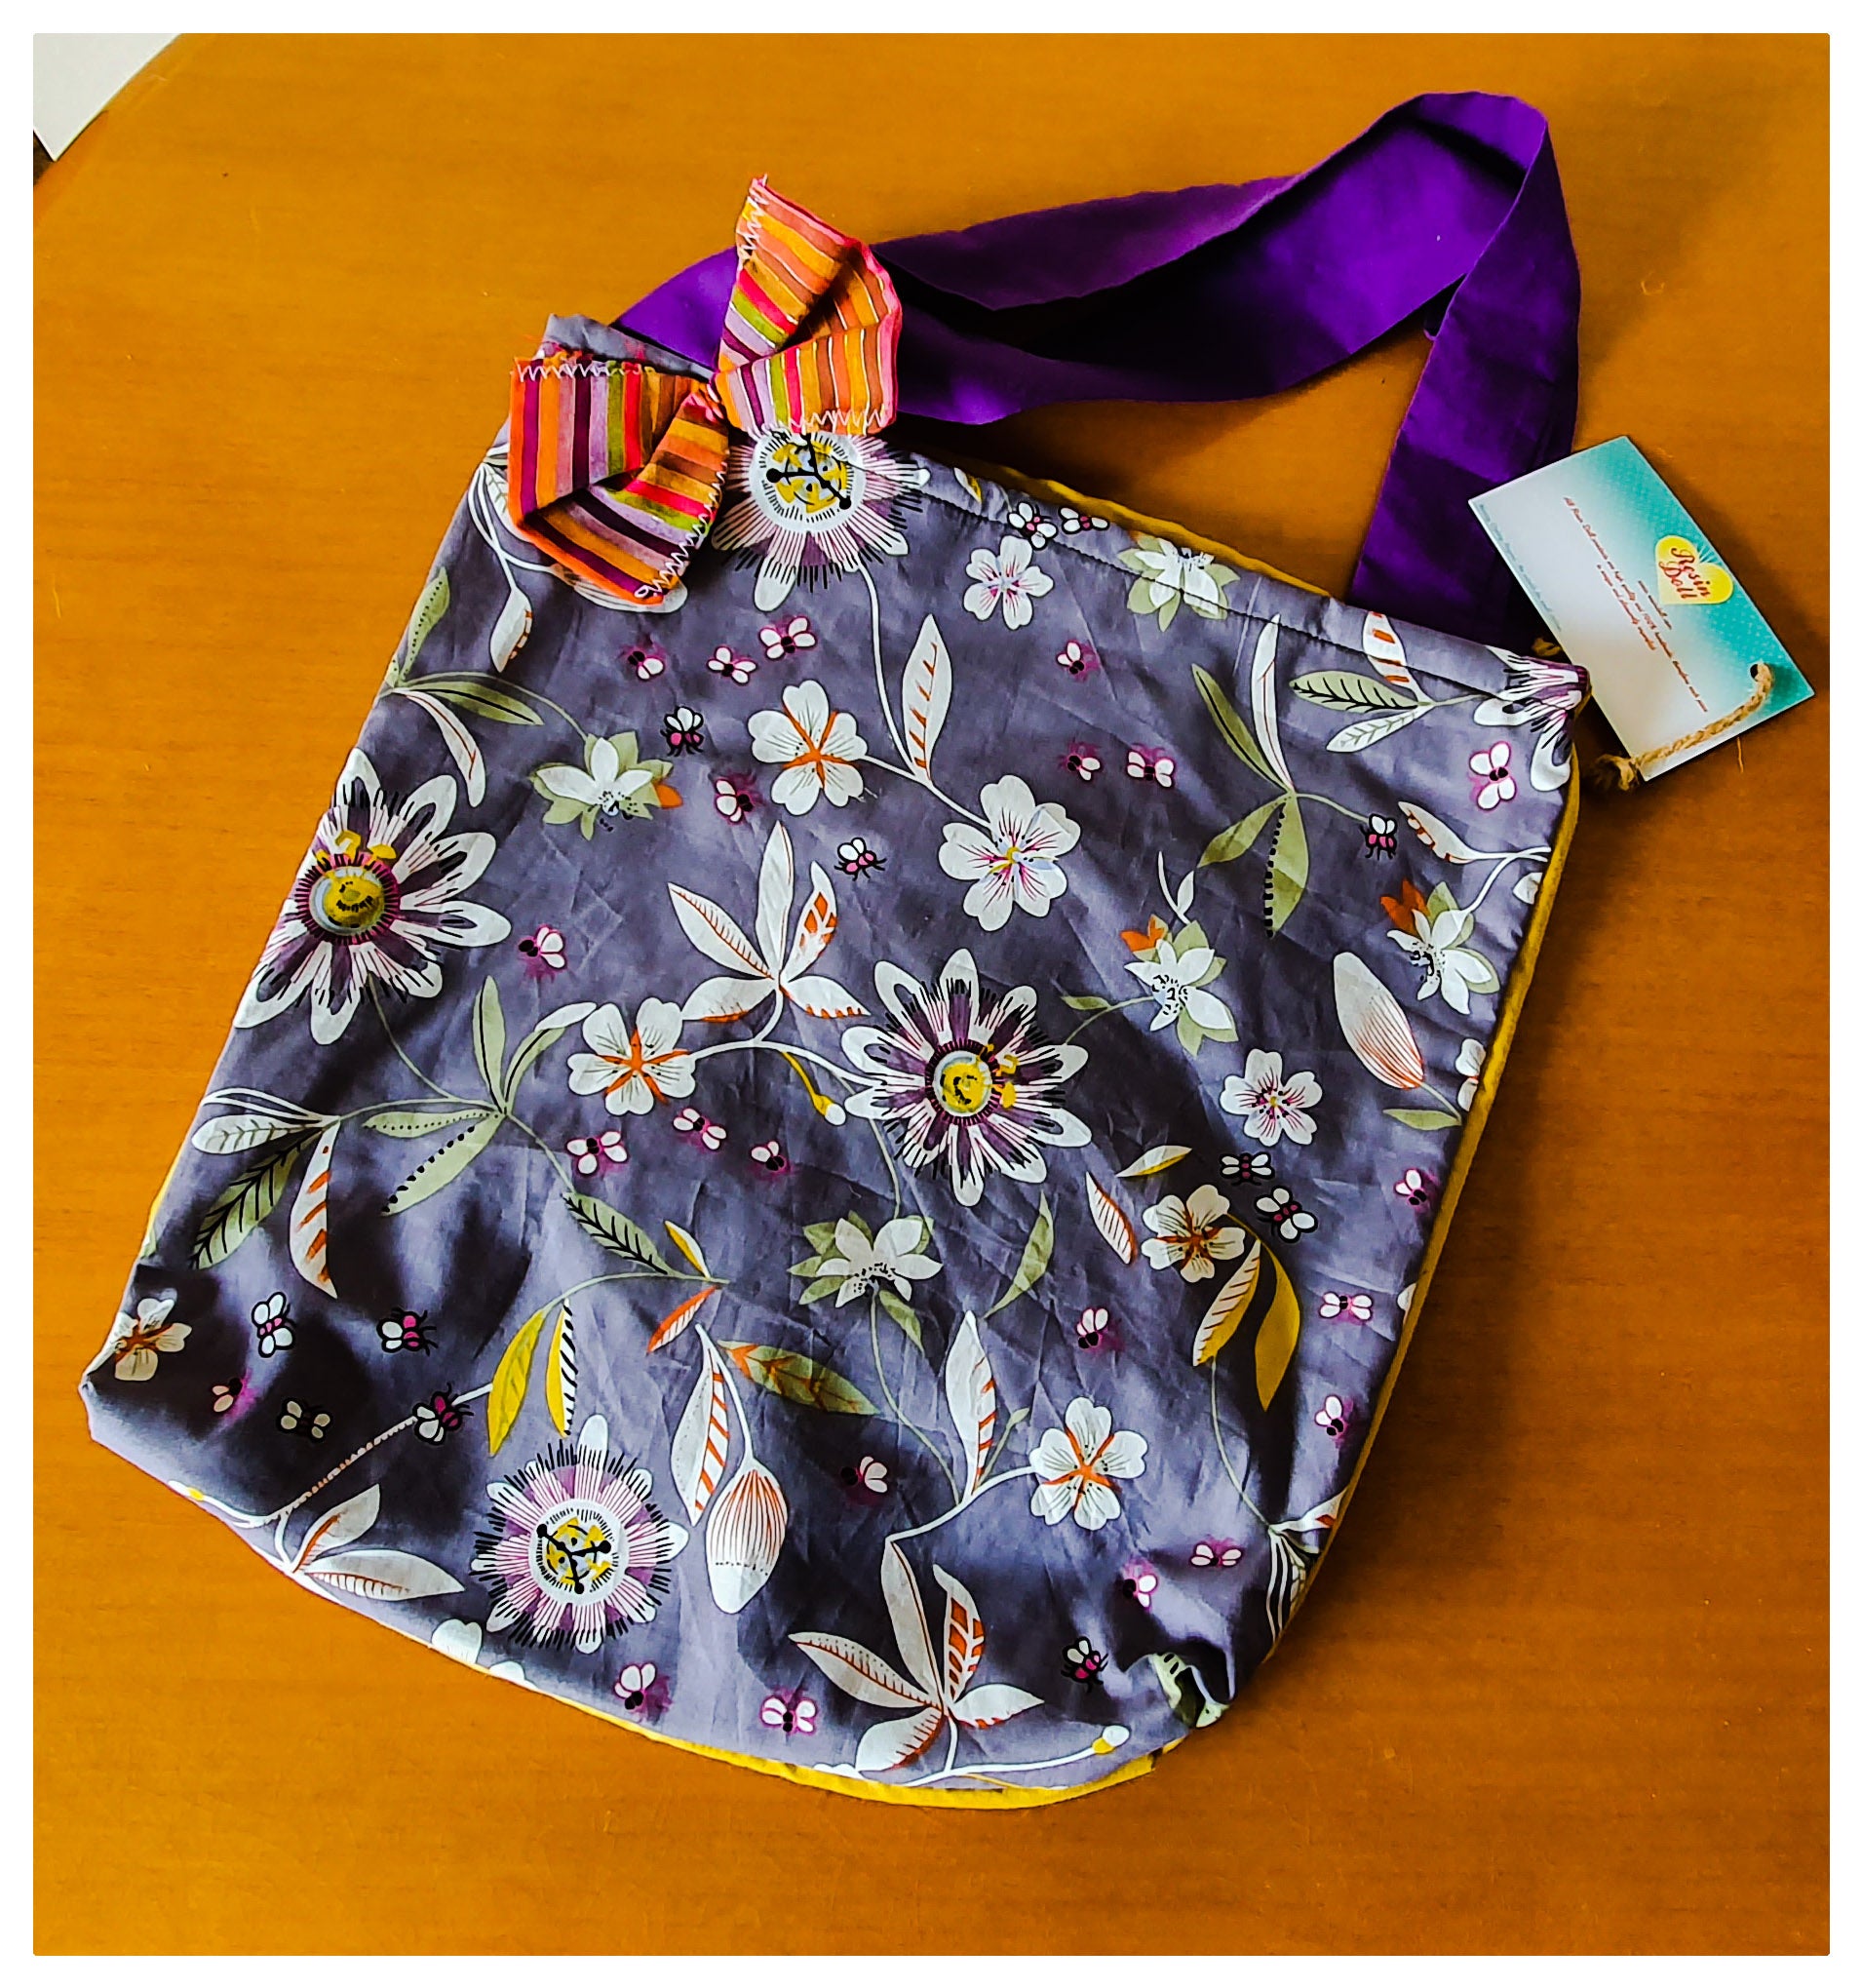 Passion flower Shopping bag